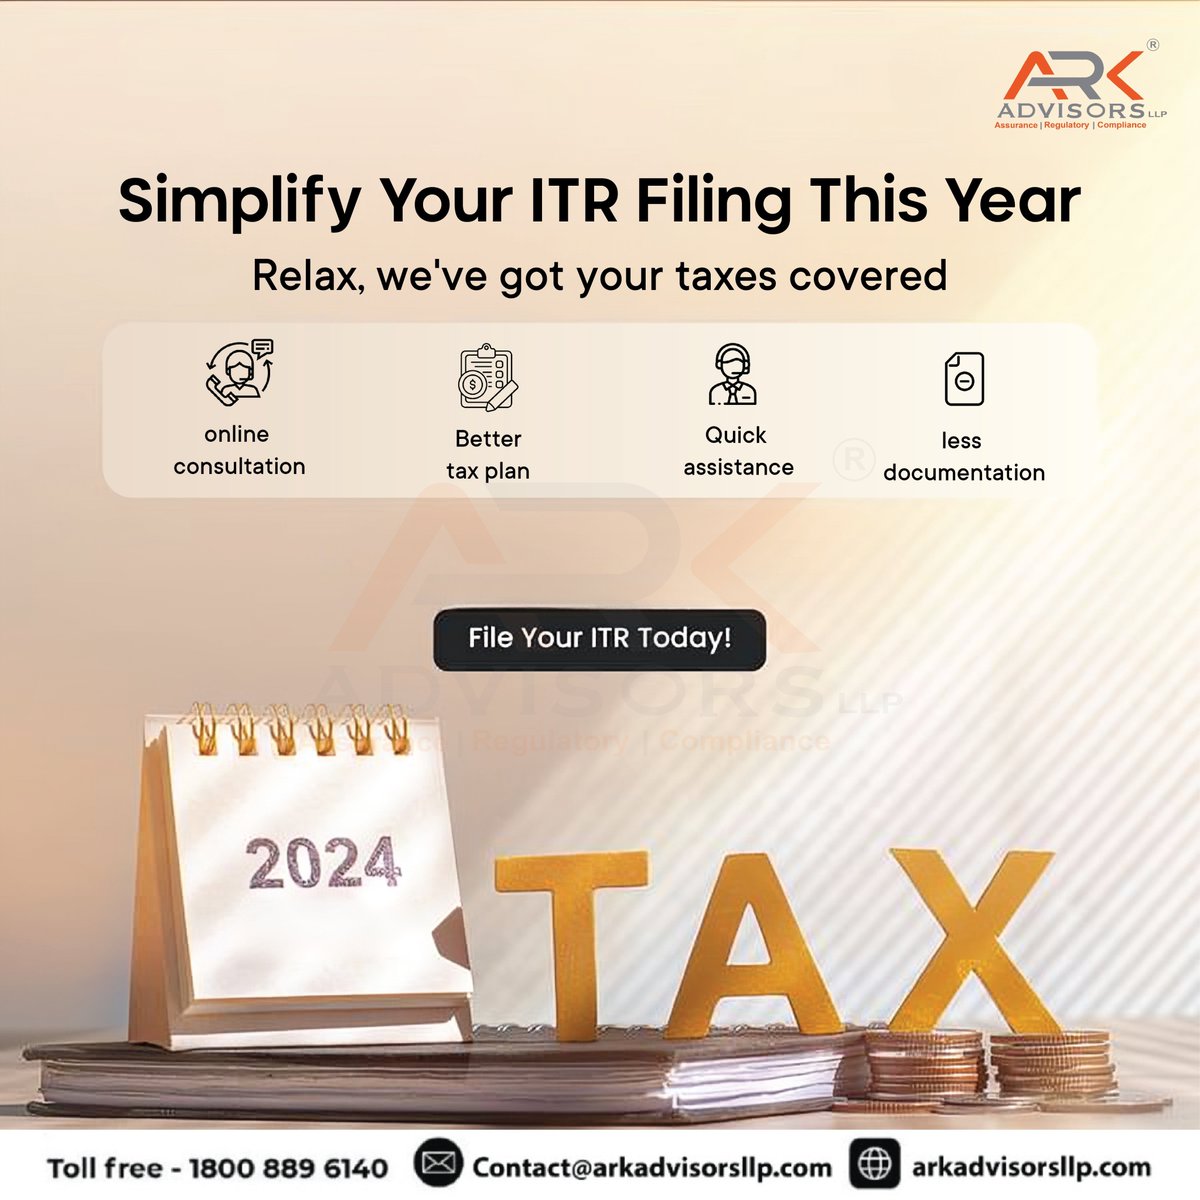 Time to tackle your taxes stress-free! Let us handle your ITR filing with ease. 📑✨

.
.
.
#arkadvisorsllp #9392030273 #18008896140# #TaxSeason #ITRFiling #HassleFree Sure, #TaxPreparation #TaxExperts #FinancialServices #TaxHelp #IncomeTaxReturn #TaxTips #TaxTime #MoneyMatters